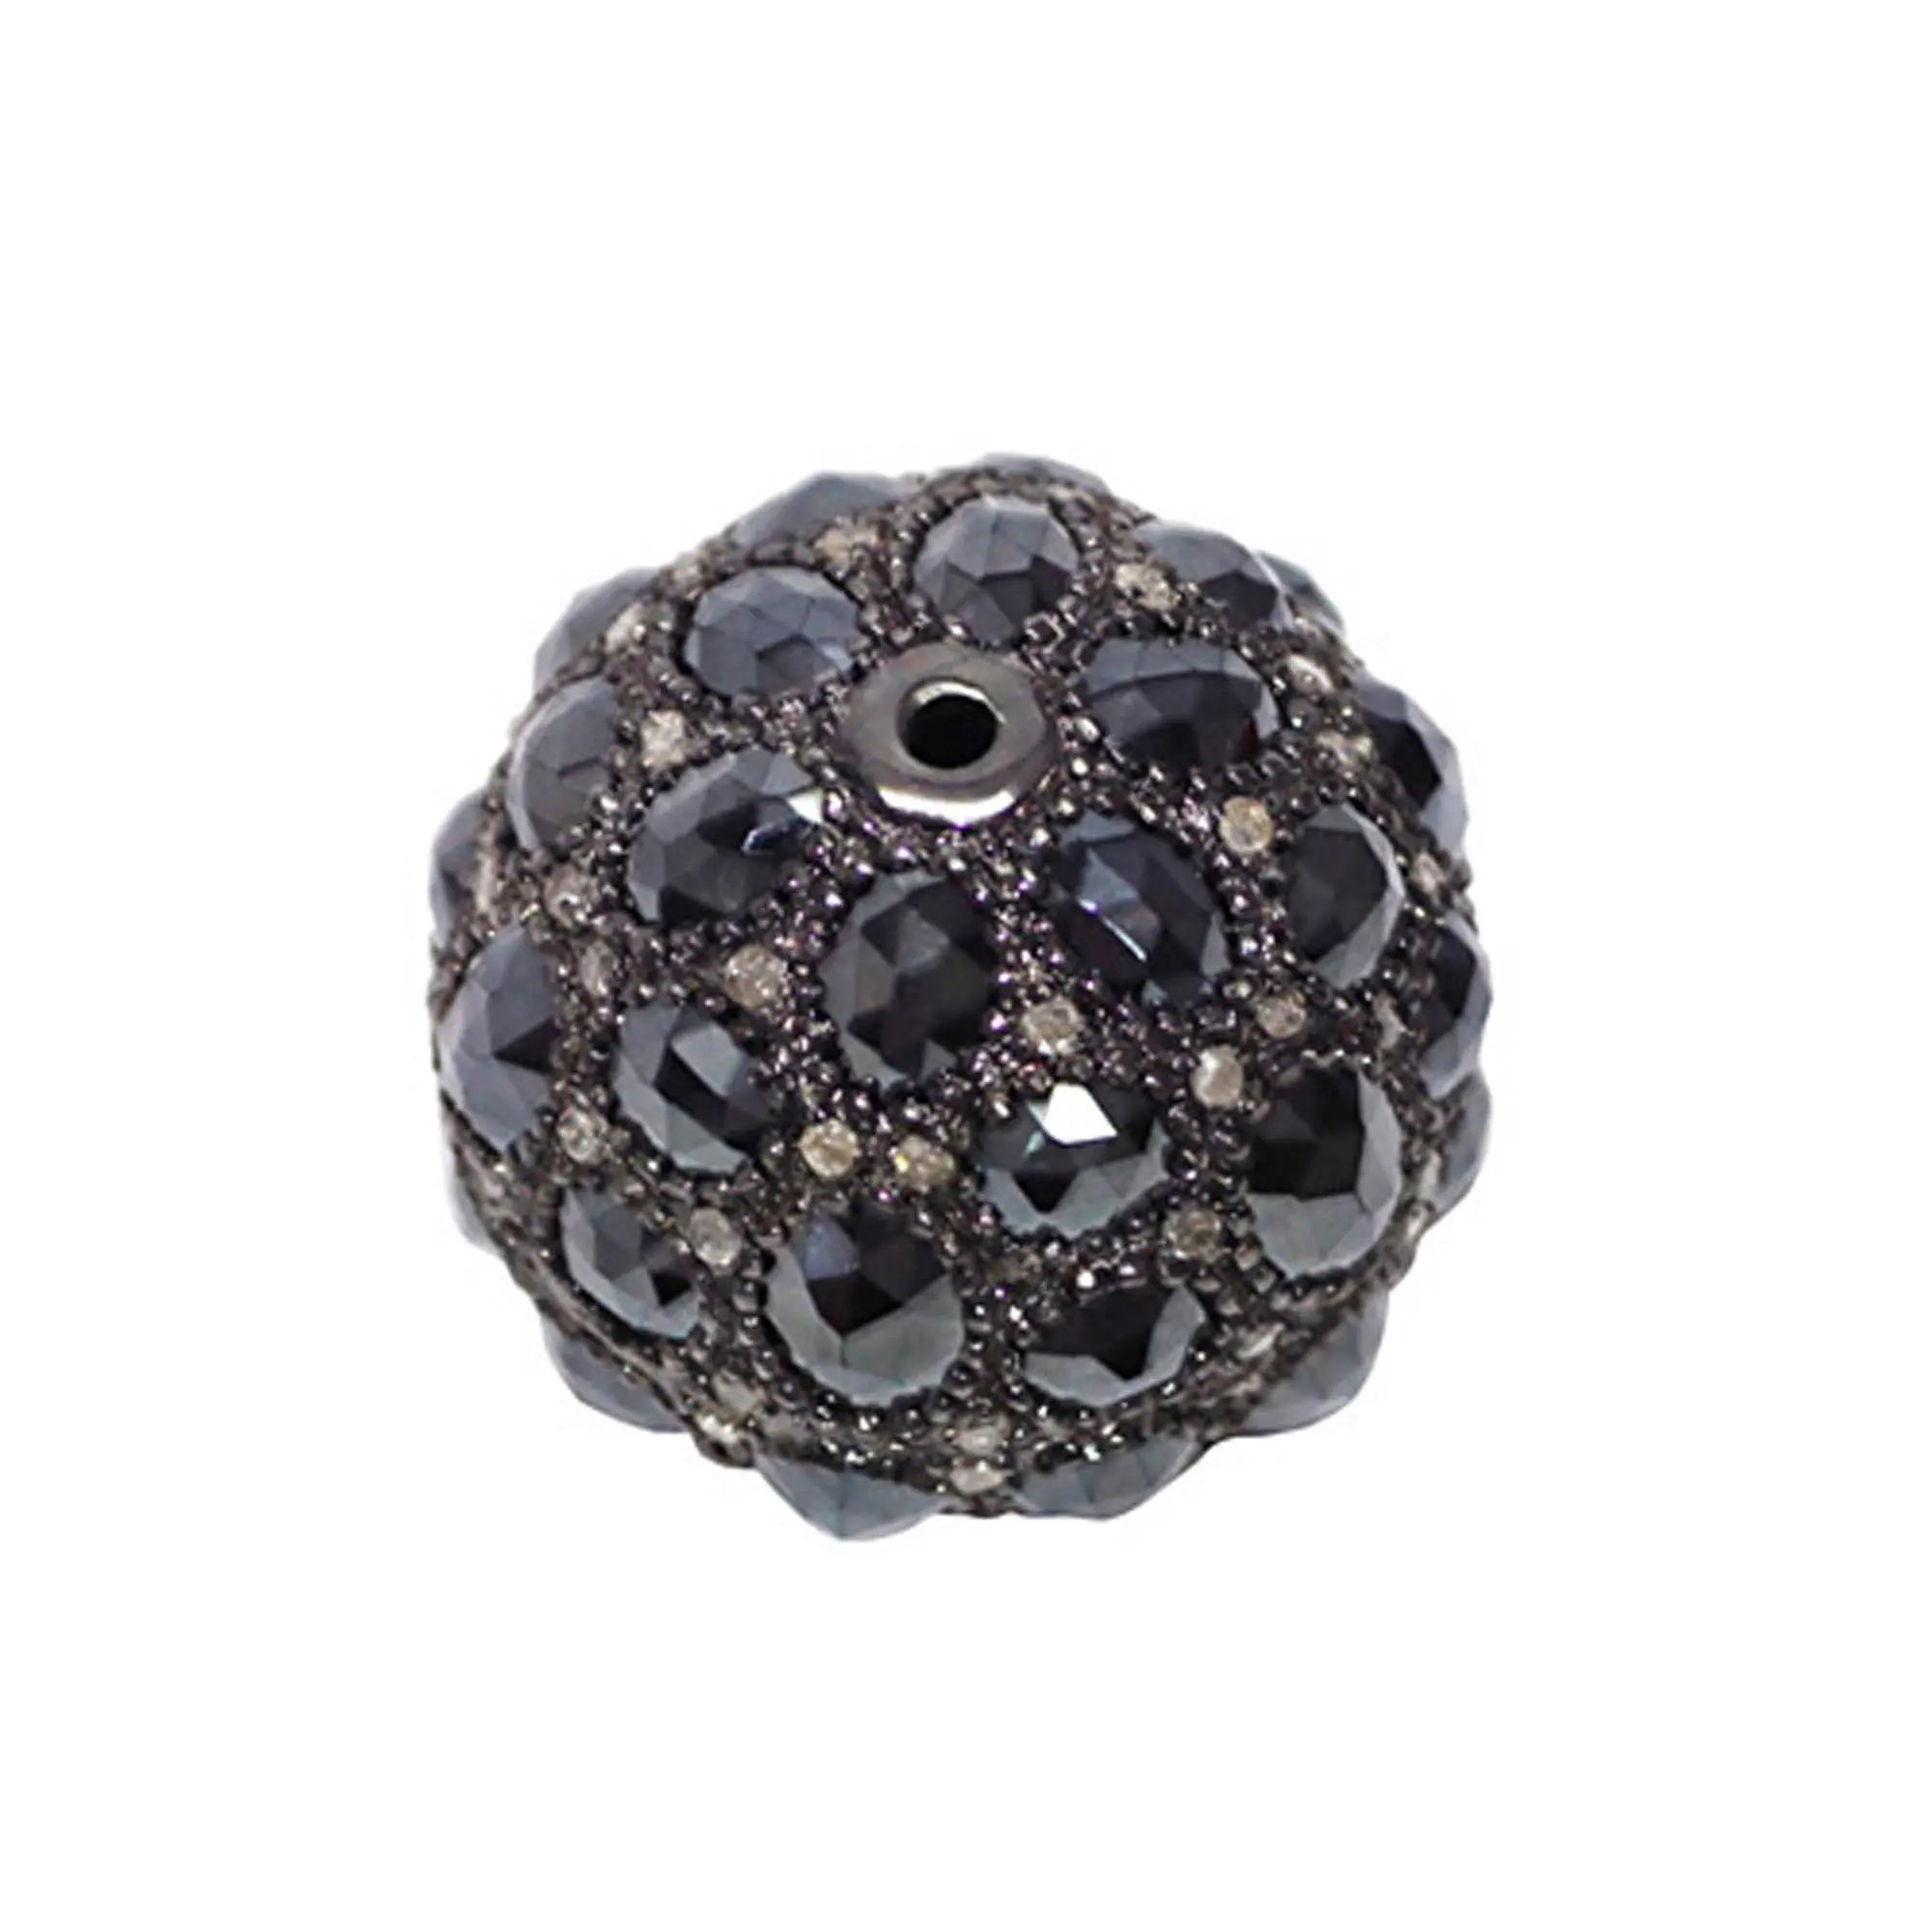 Black Spinel Gemstone Spacer Ball Finding 925 Sterling Silver Wholesale Jewelry Supplier